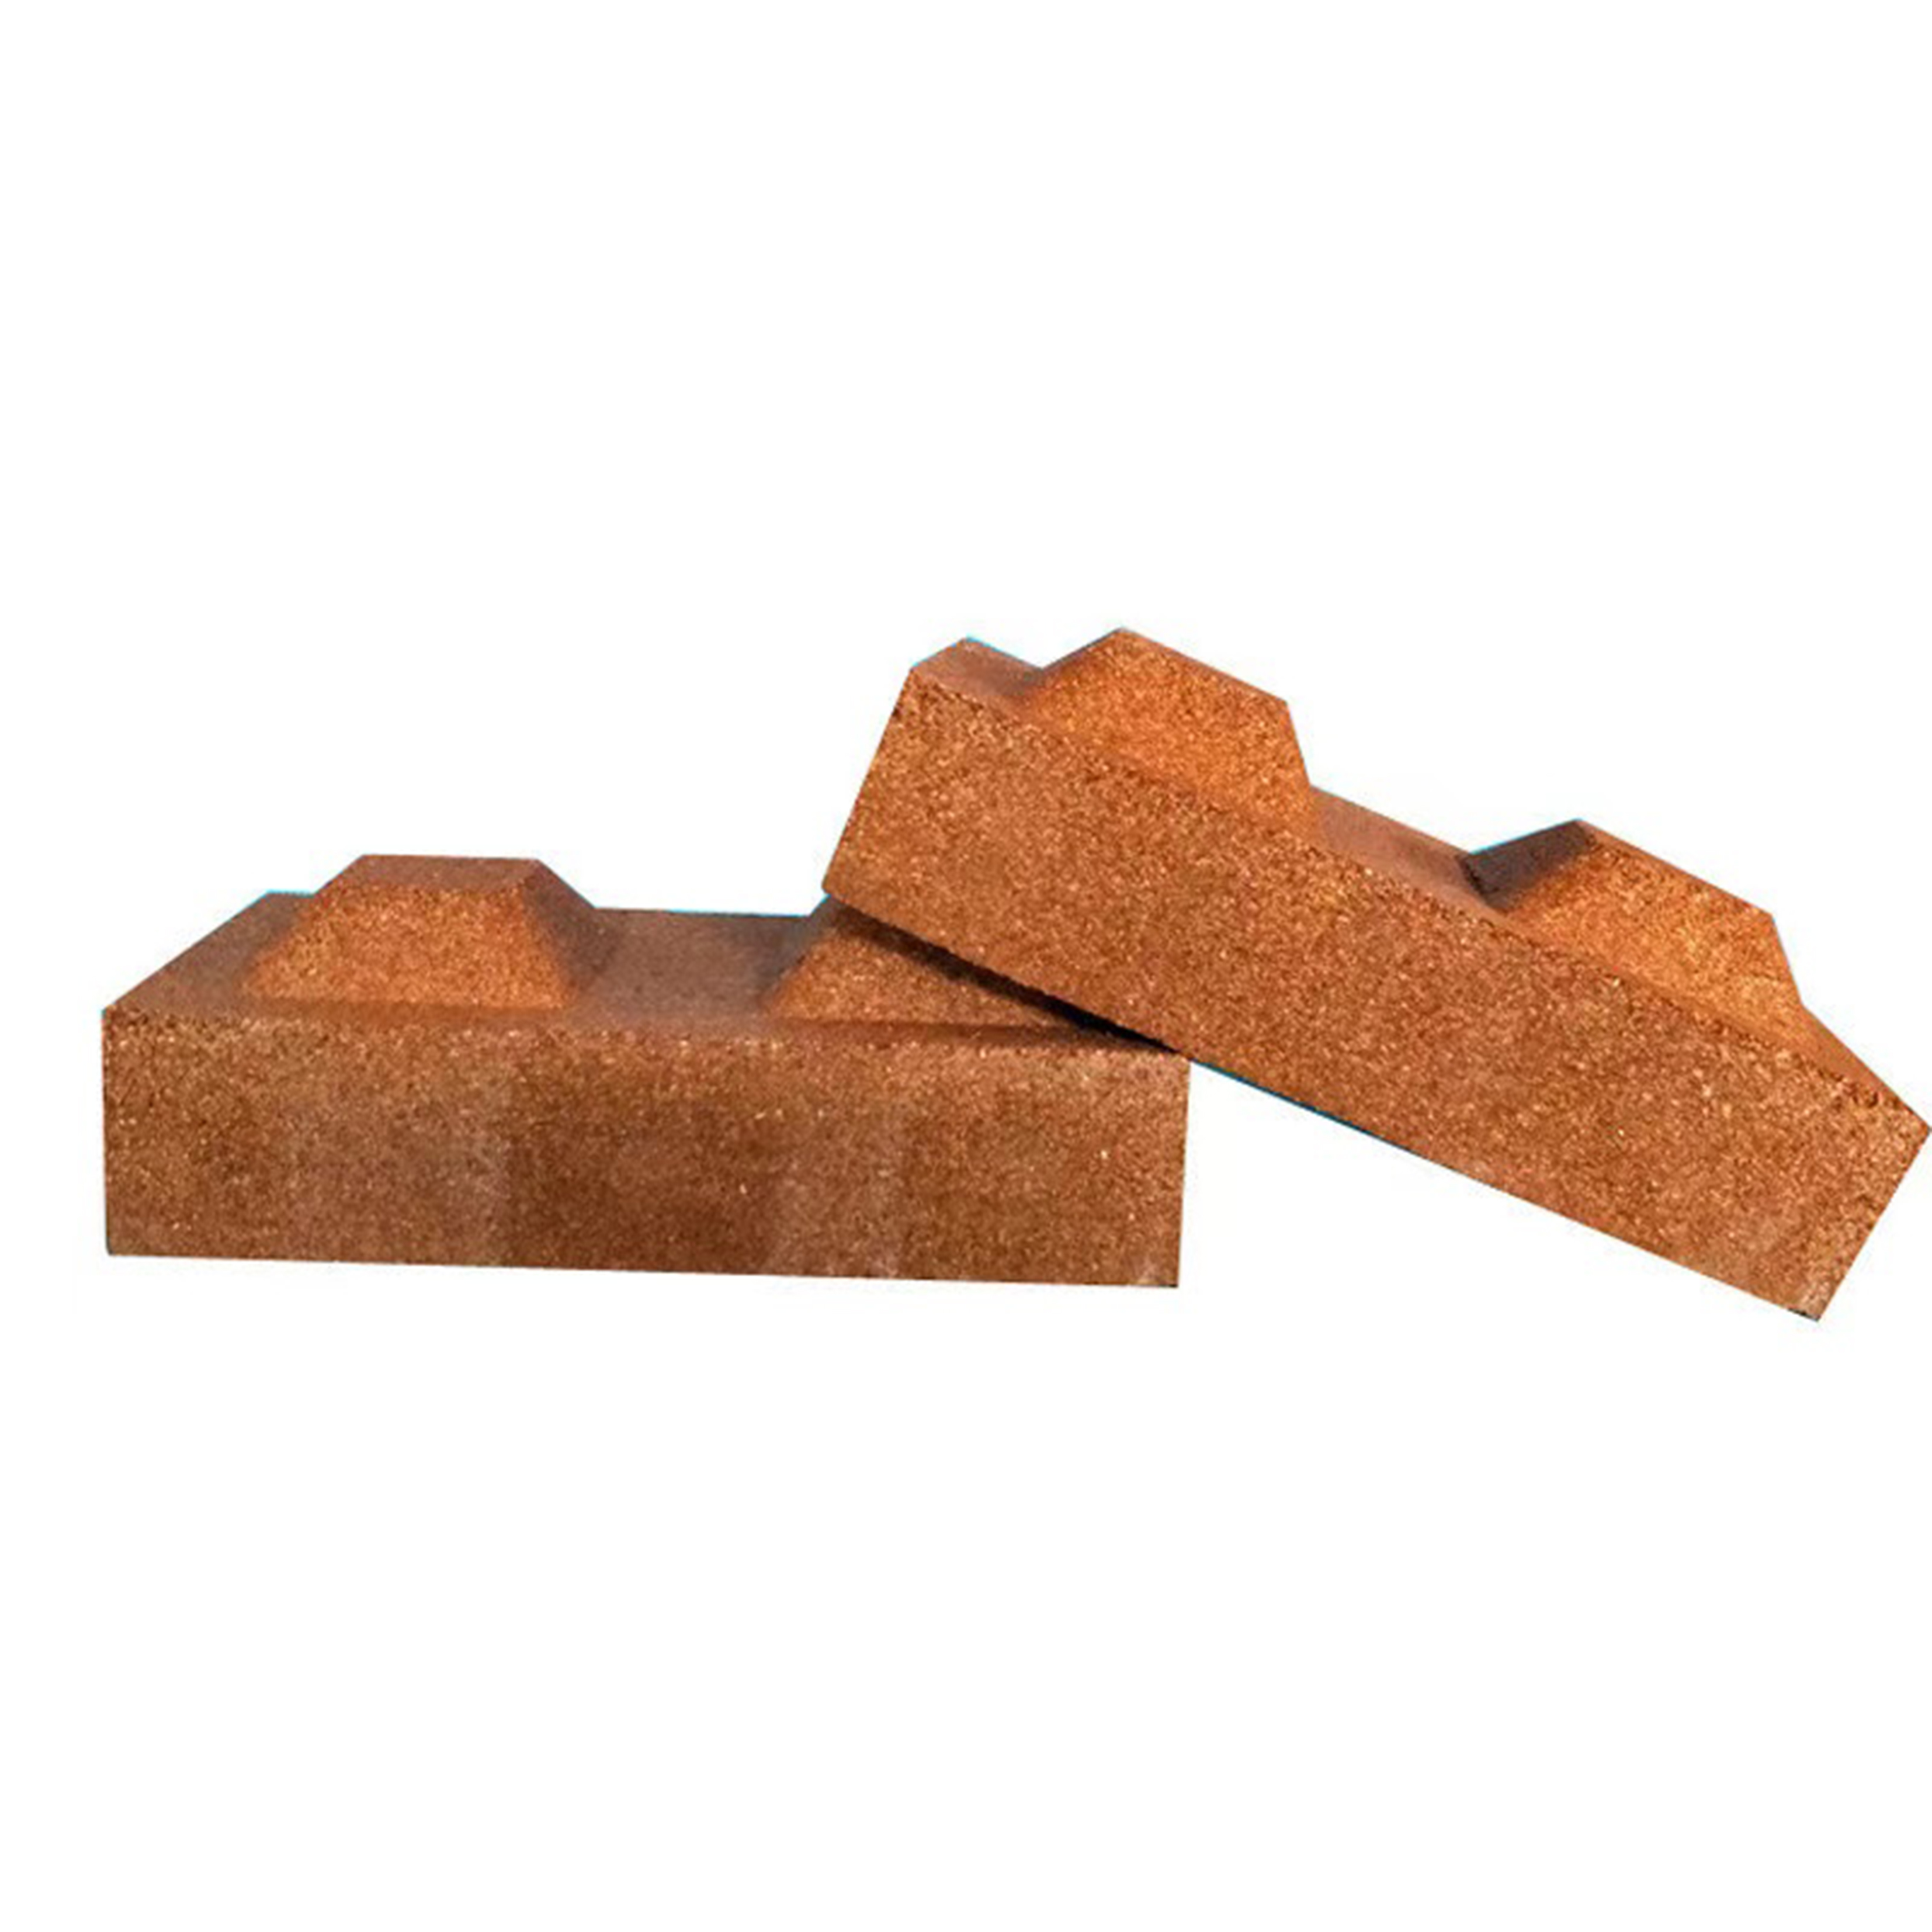 Fireproof modular fireproof expansion module fireproof brick available from stock